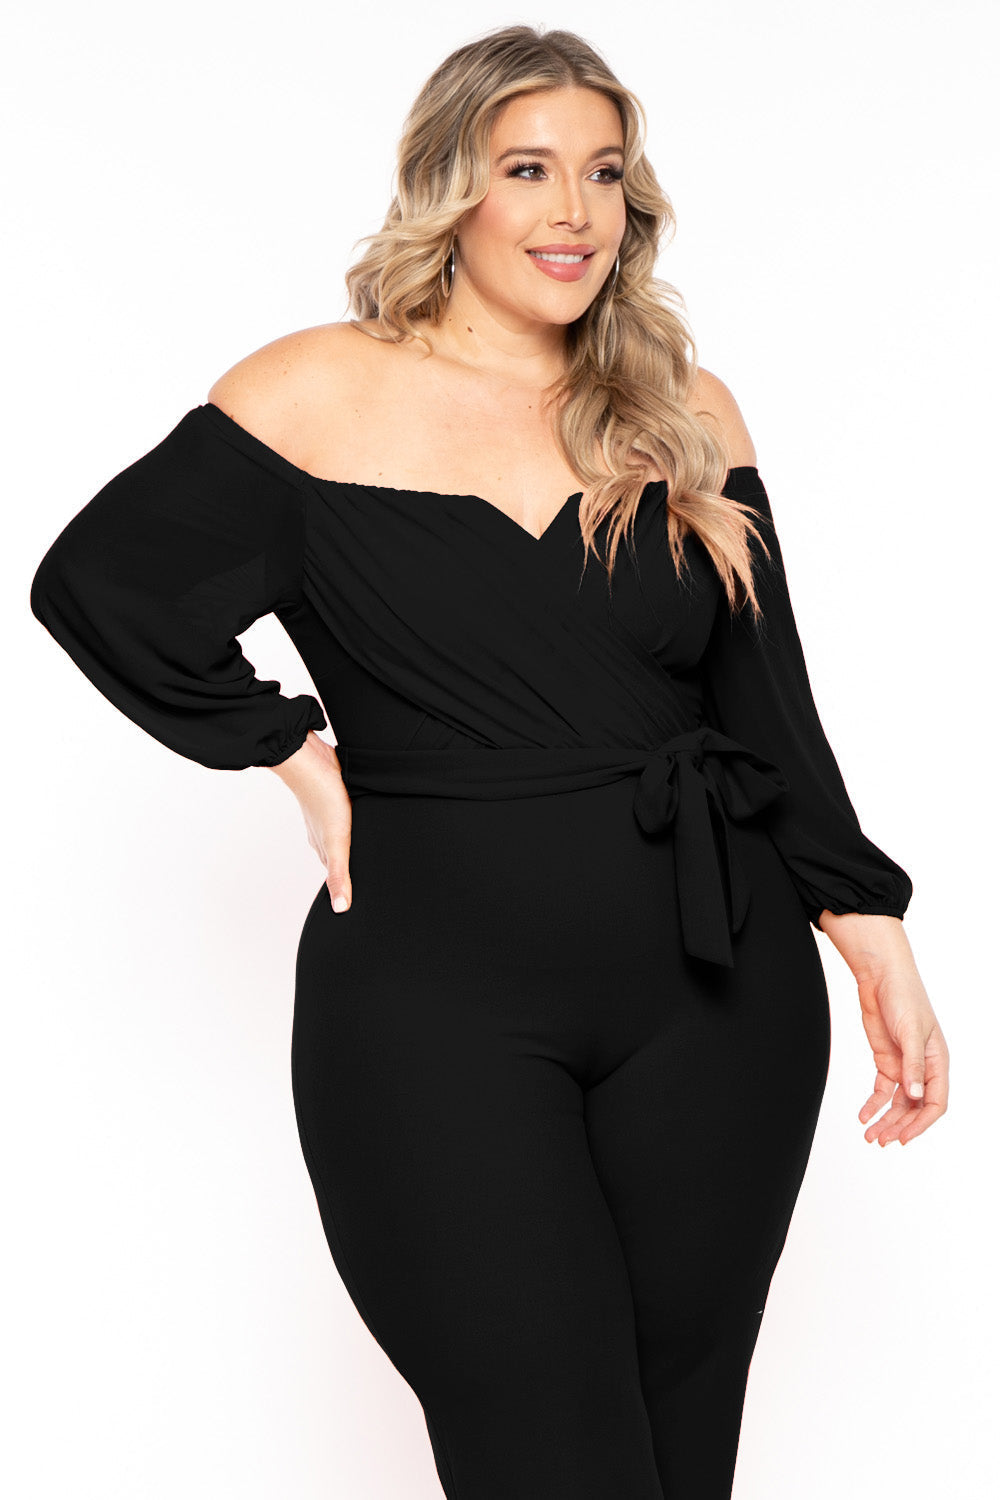 Find Me Jumpsuits and Rompers Copy of Plus Size Aryana Cross Over Jumpsuit - Black